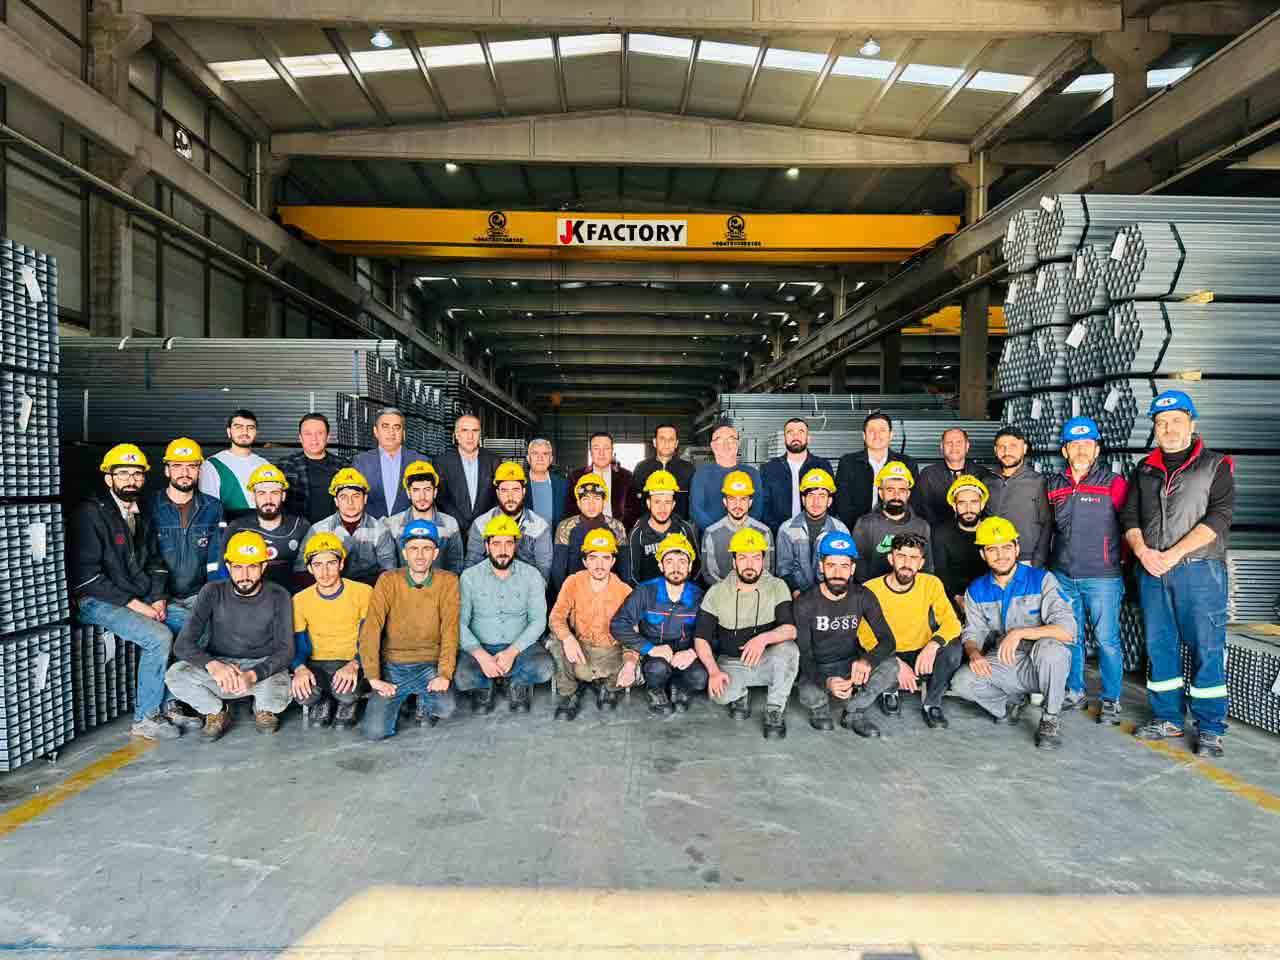 Workers and management of JK factory Image